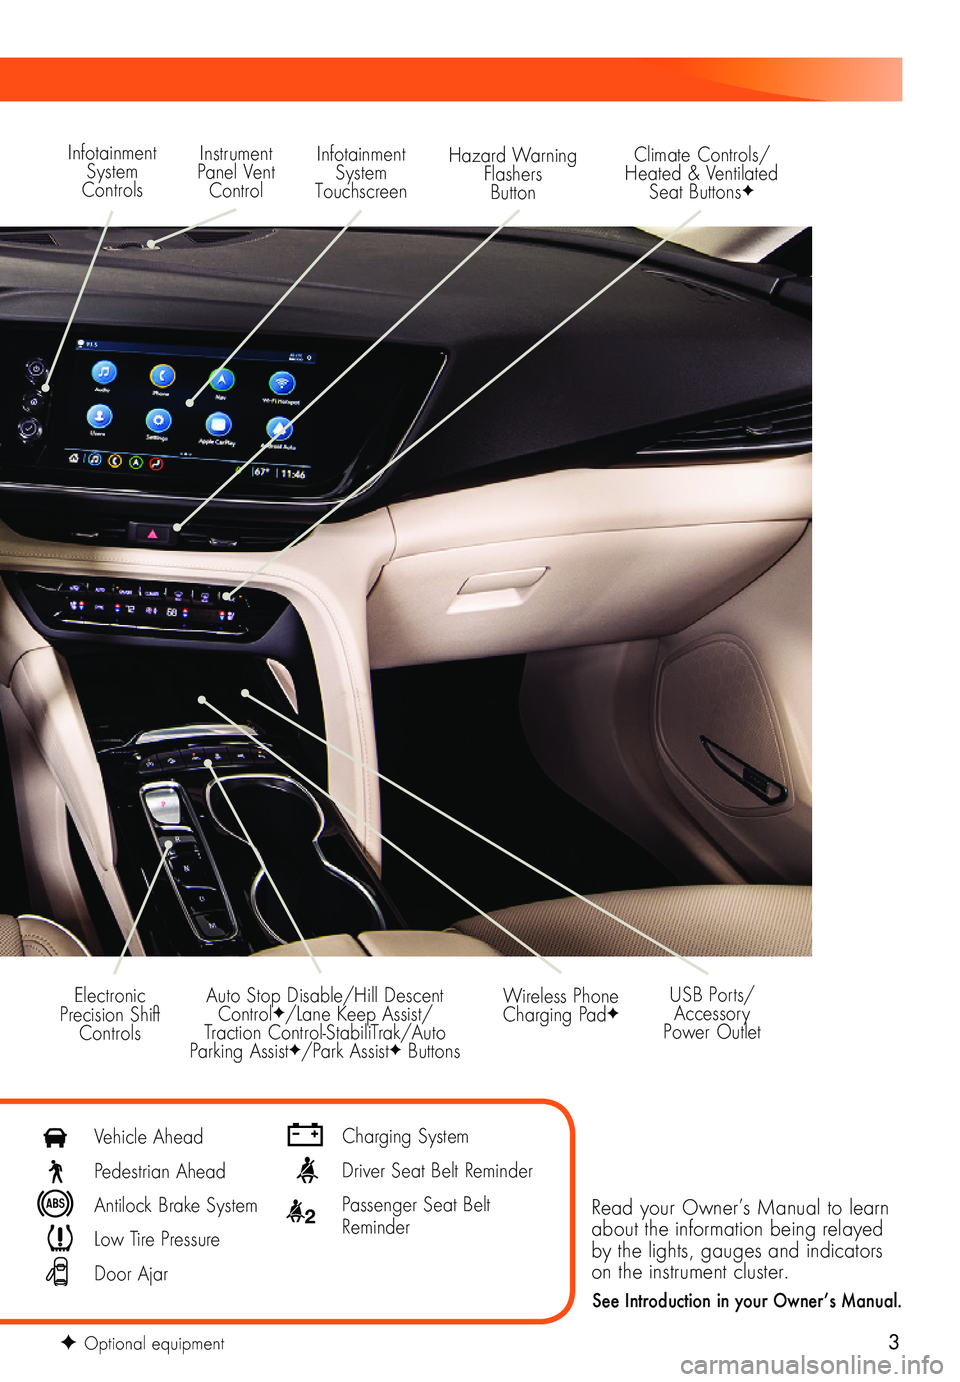 BUICK ENVISION 2021  Get To Know Guide 3
Read your Owner’s Manual to learn about the information being relayed by the lights, gauges and indicators on the instrument cluster.
See Introduction in your Owner’s Manual.
Infotainment System